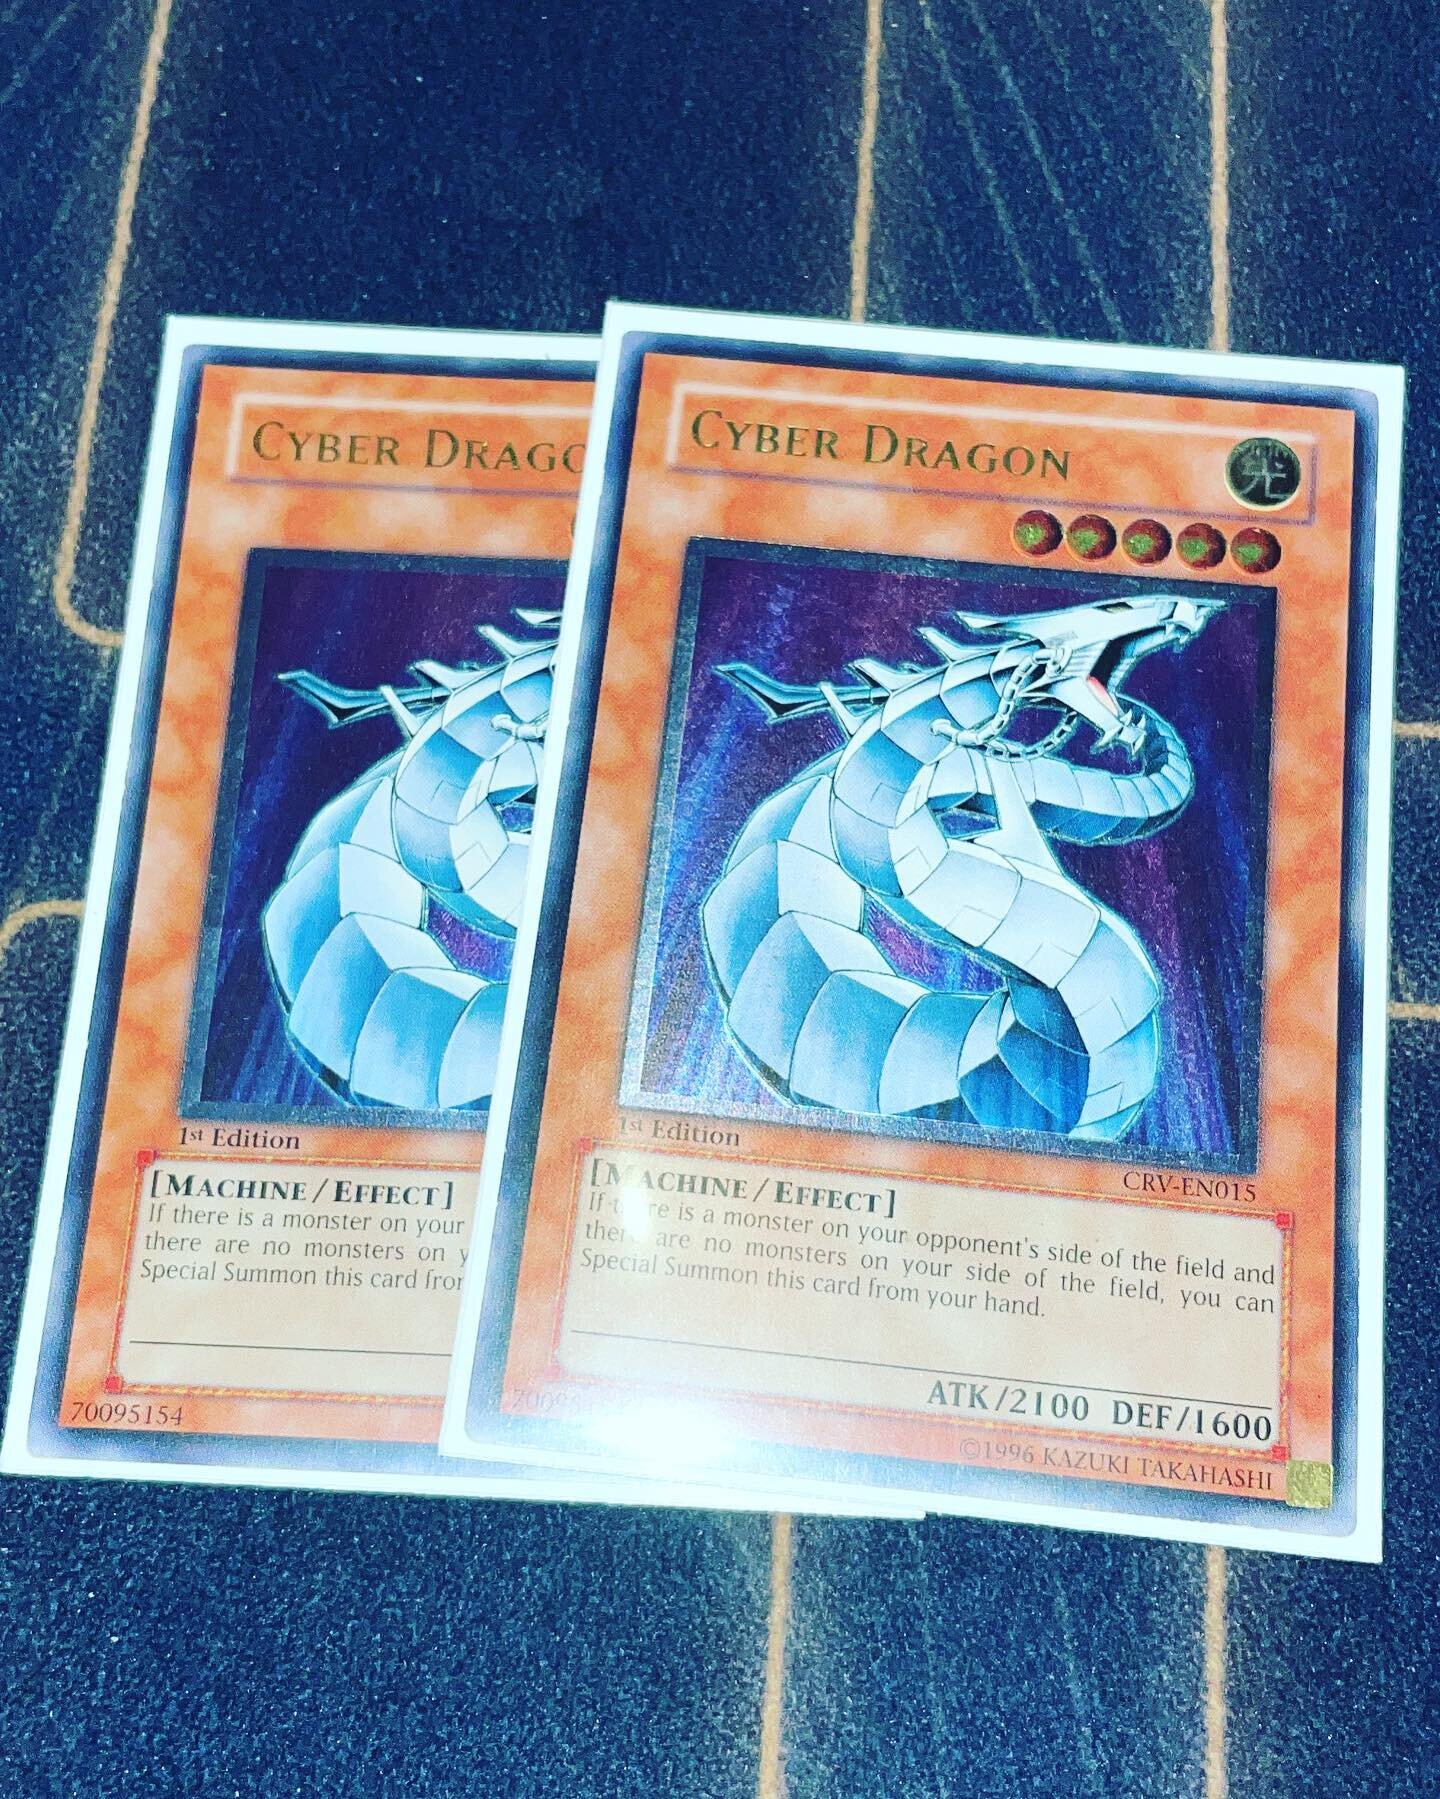 GX is the last part of yugioh I watched, And cyber dragon was one of my favorite cards from that period. What&rsquo;s your favorite period from yugioh?